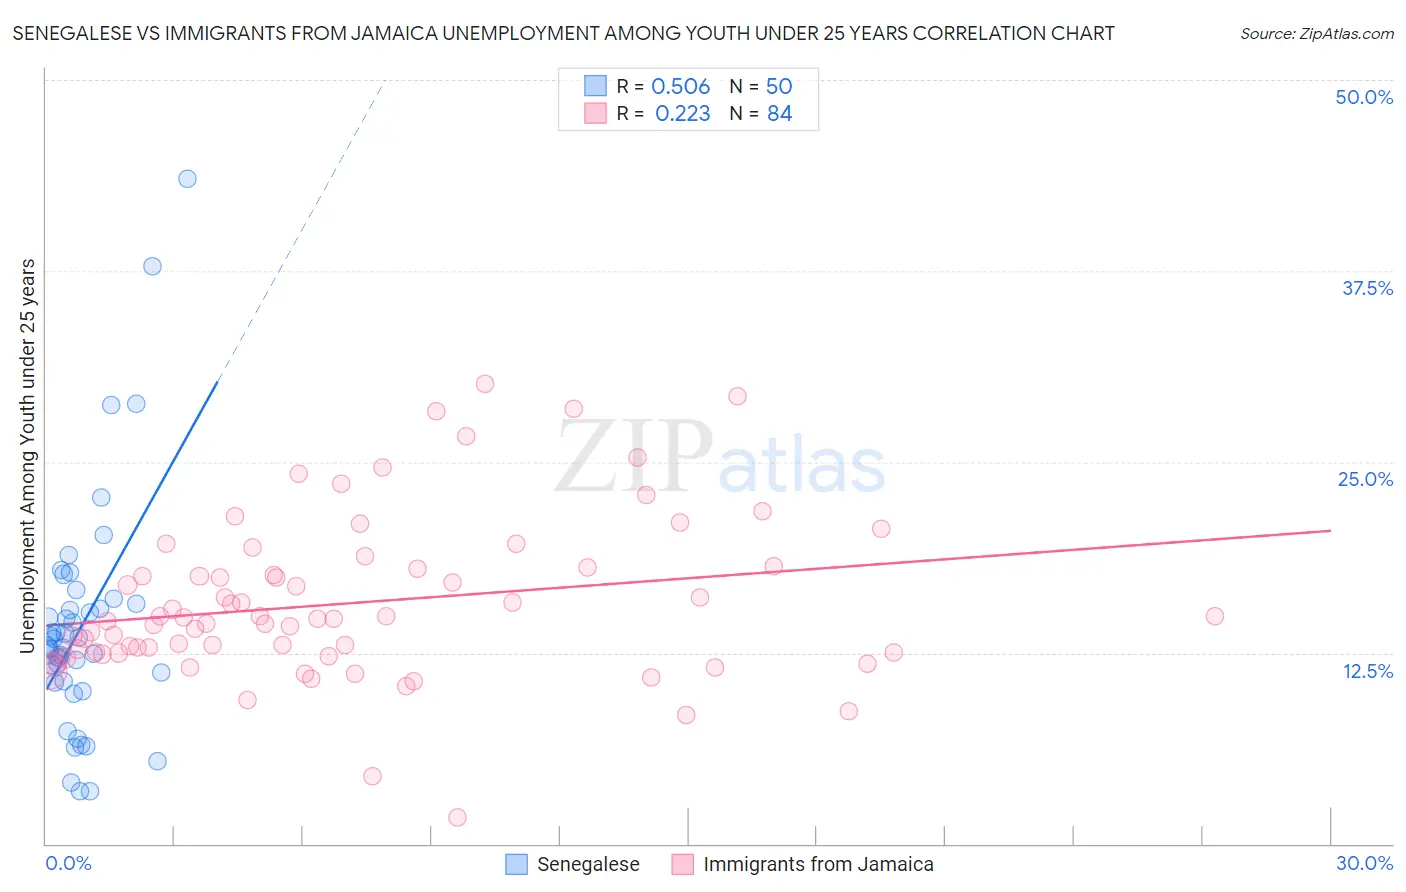 Senegalese vs Immigrants from Jamaica Unemployment Among Youth under 25 years